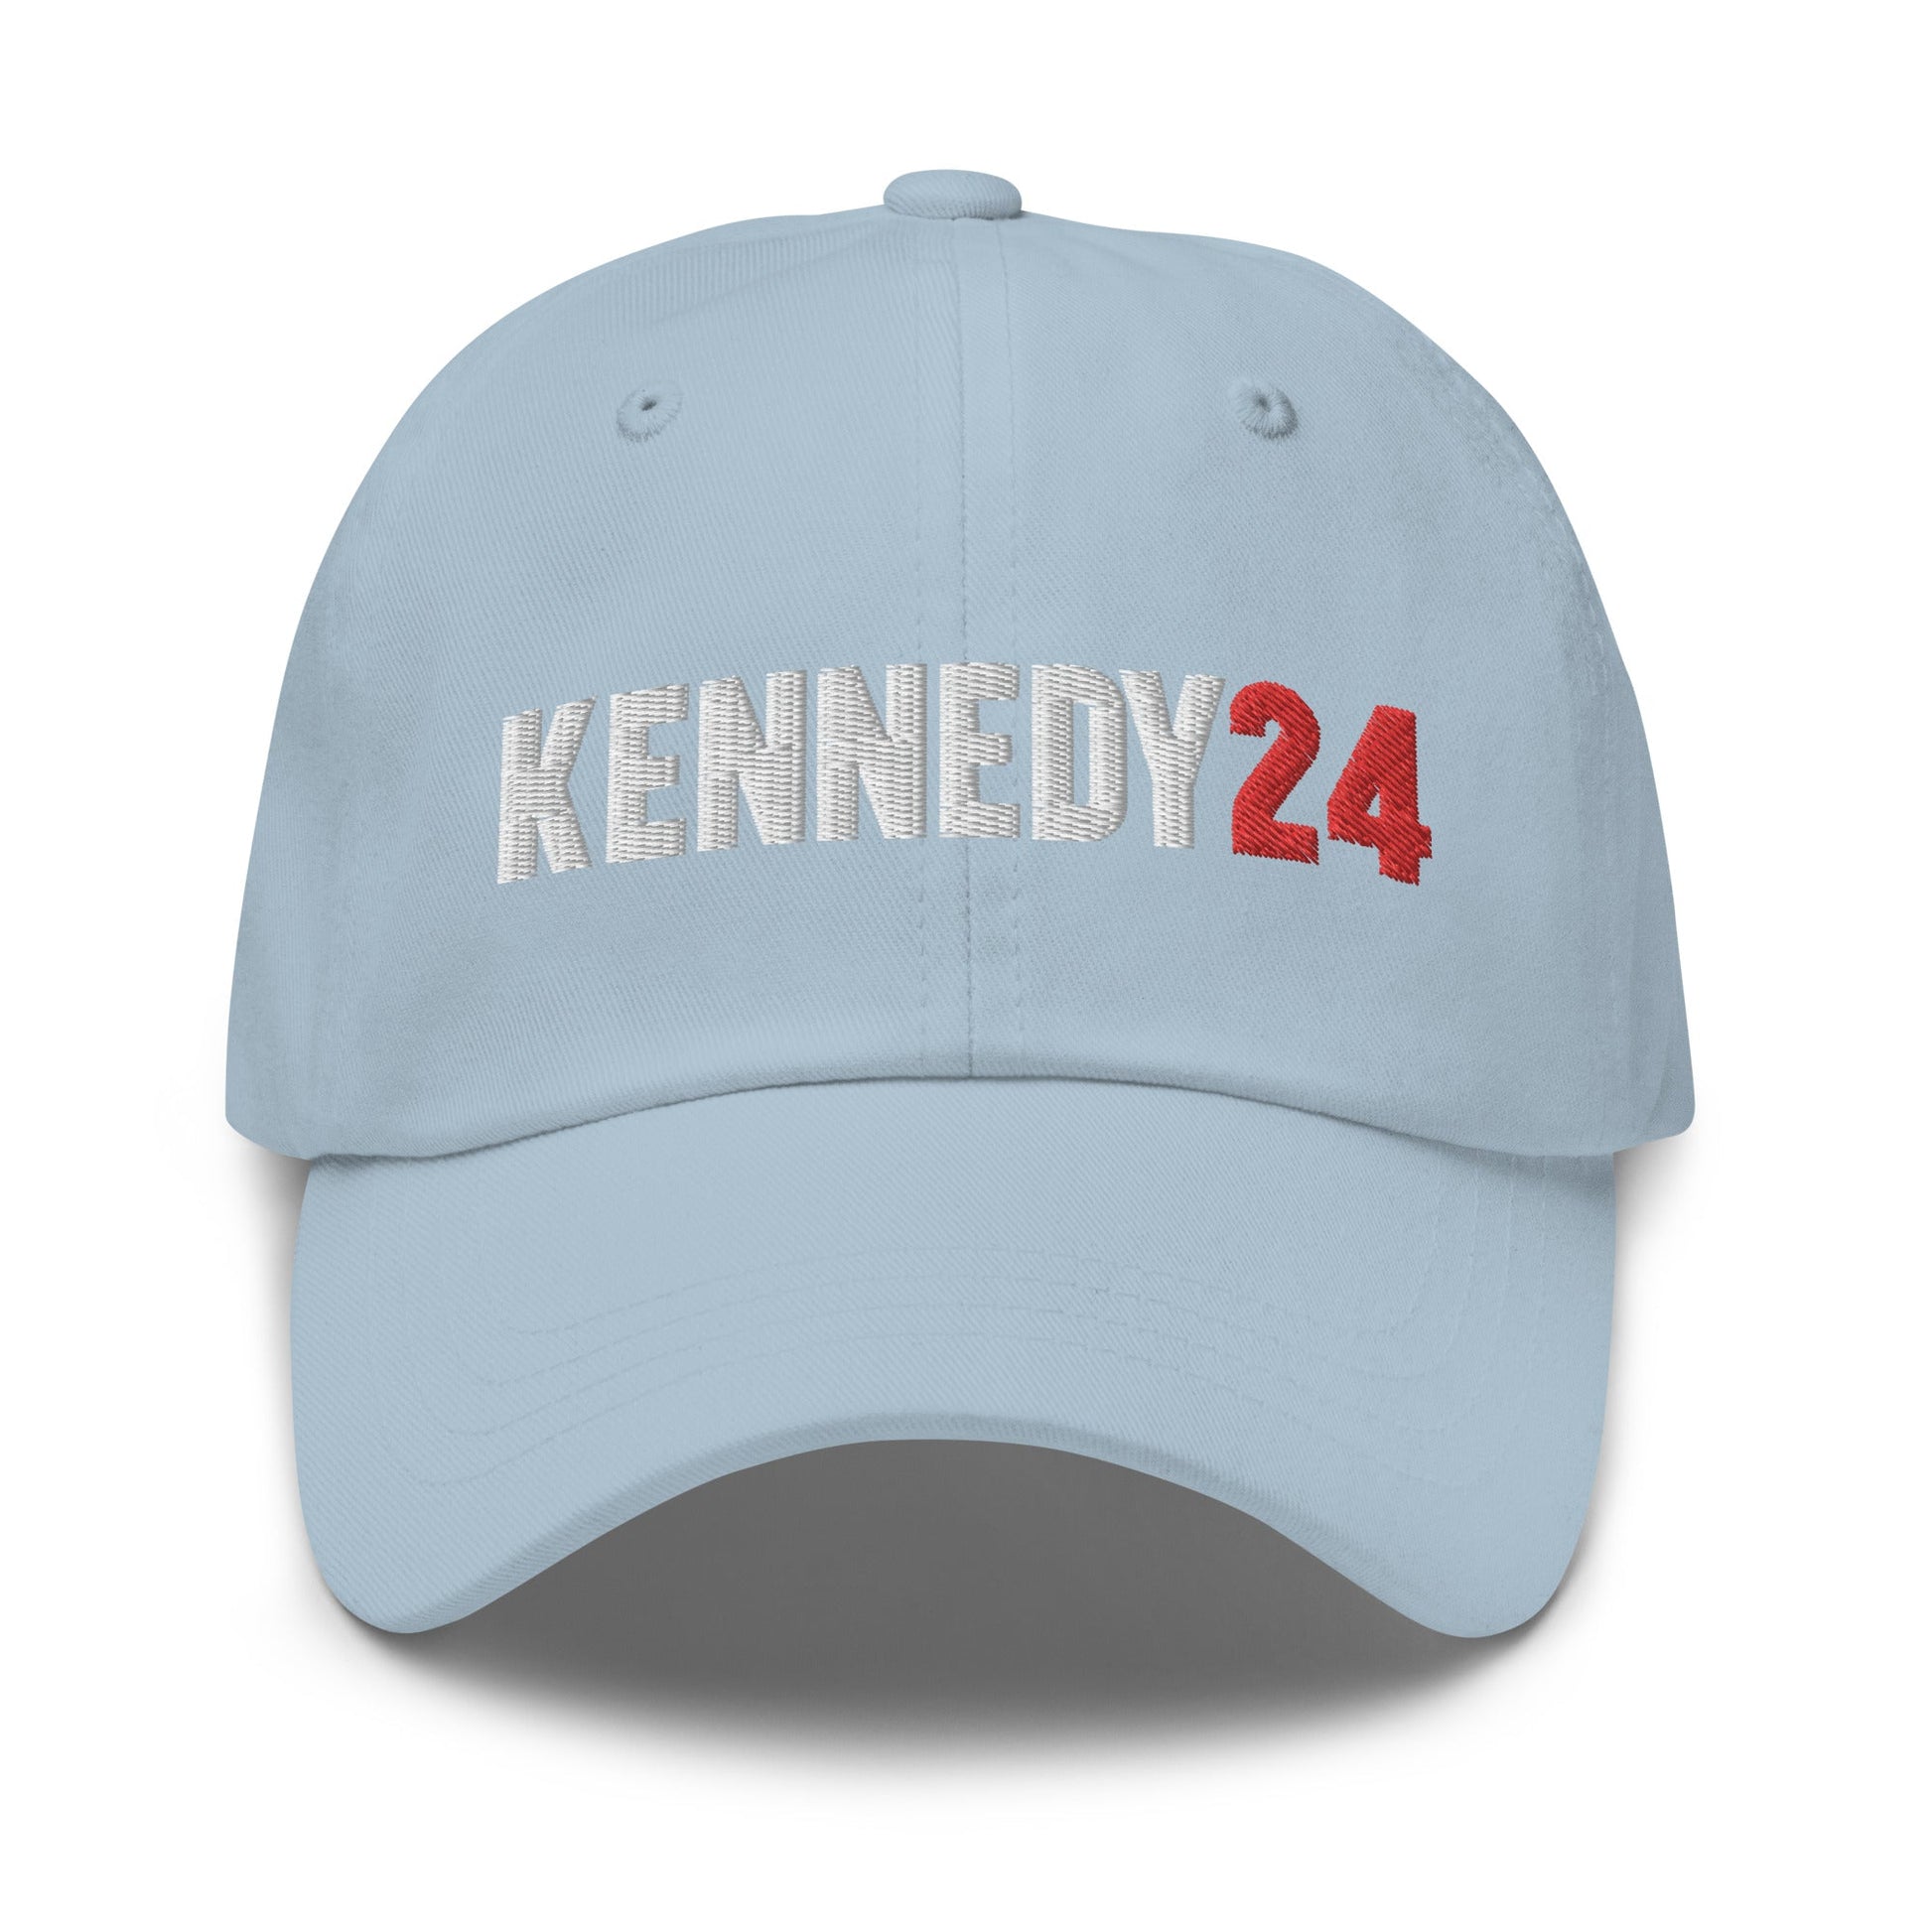 Kennedy 24 Embroidered Dad Hat - TEAM KENNEDY. All rights reserved